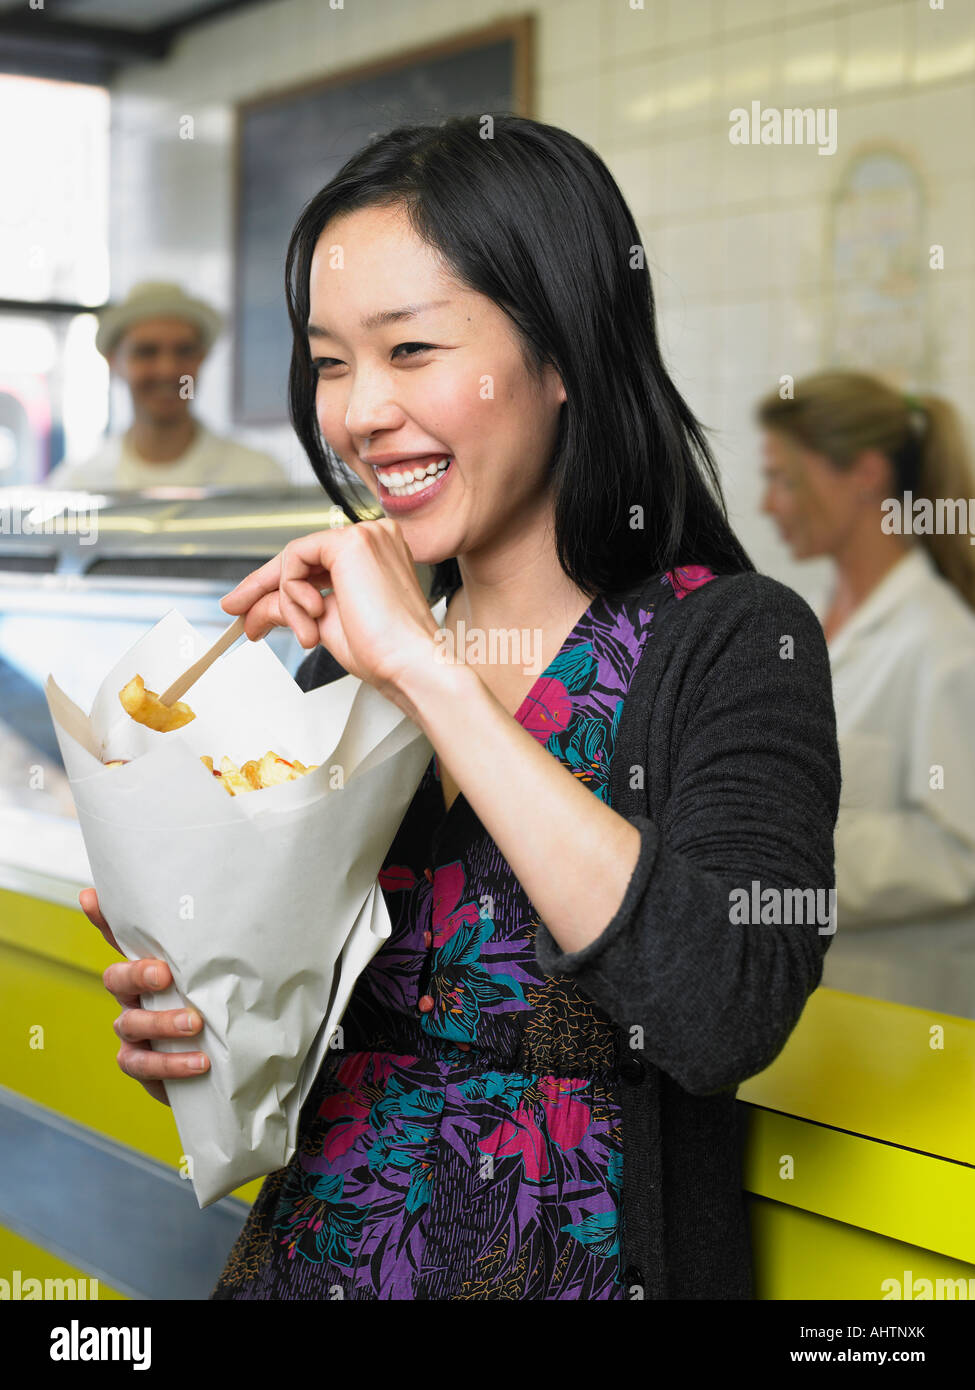 Young woman eating chips in fish and chip shop smiling Stock Photo